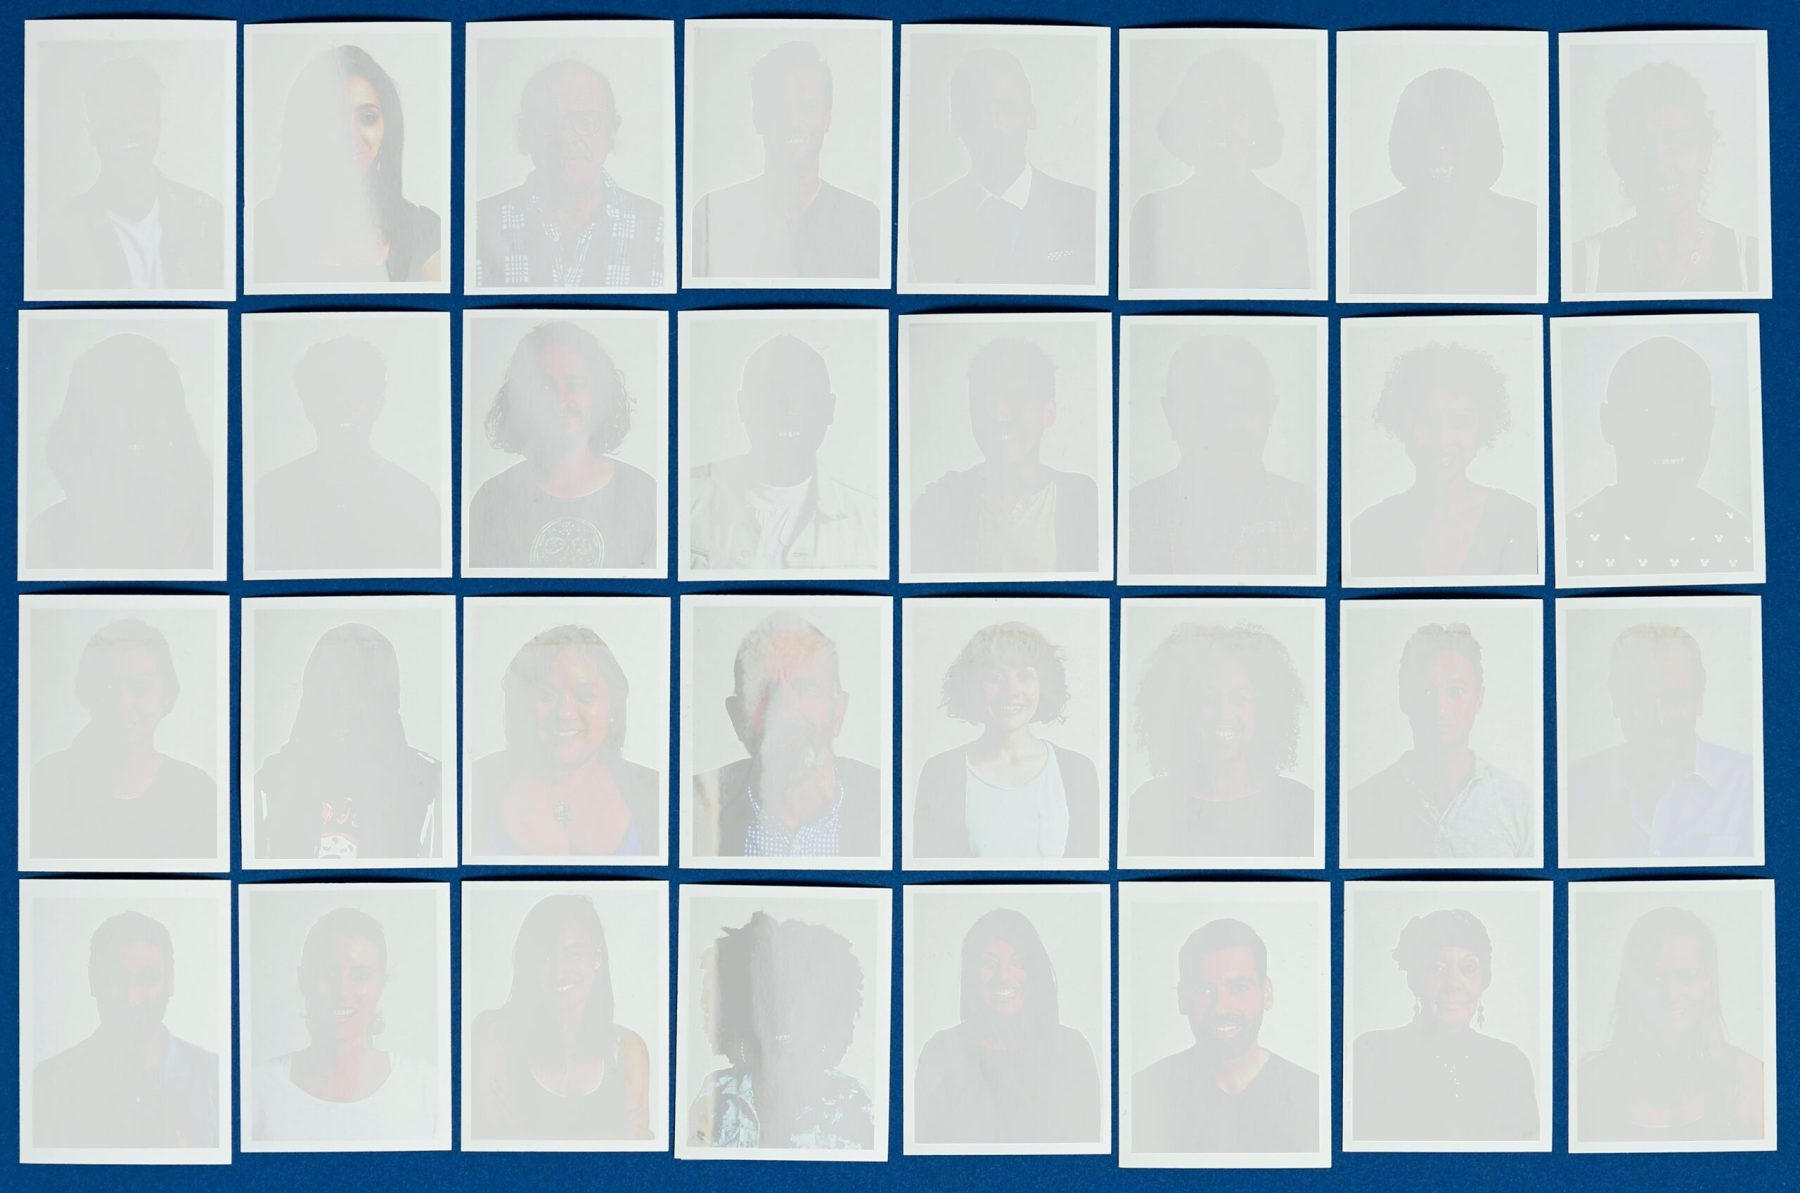 Obscured headshot of multiple people in a grid. The silhouette of the person is visible but not their features.